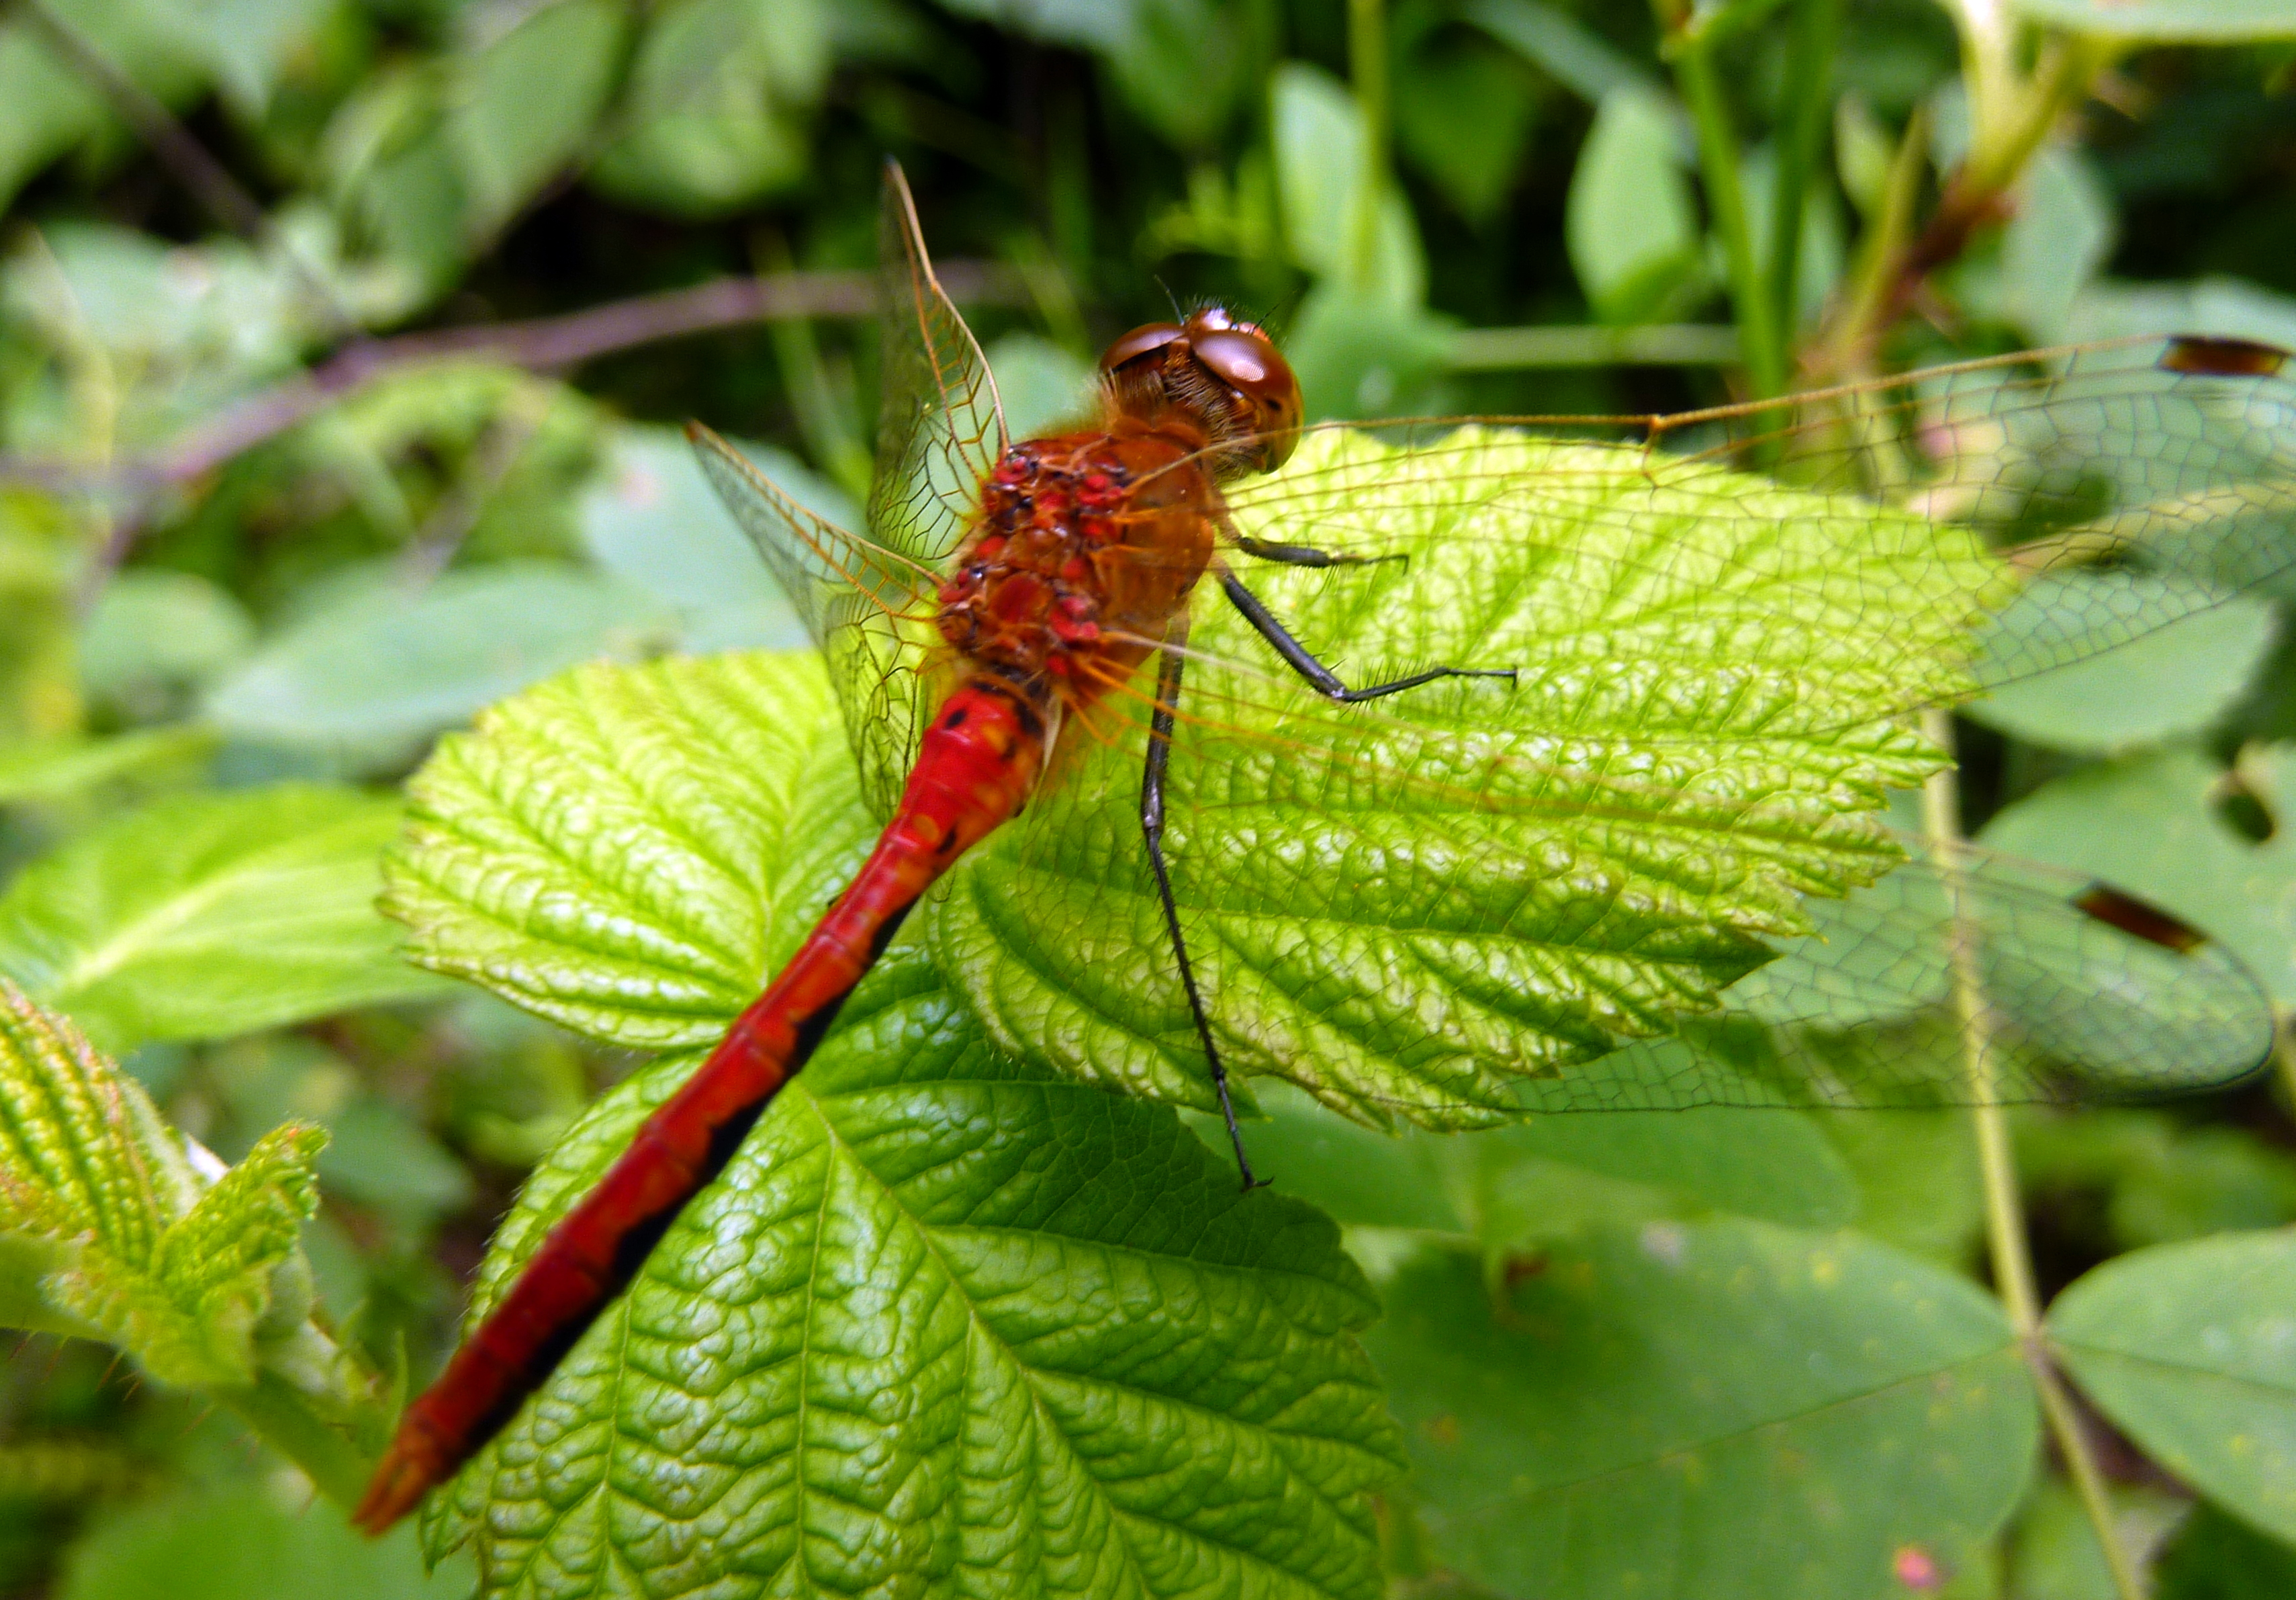 File:Red Dragonfly (7629727058).jpg - Wikimedia Commons